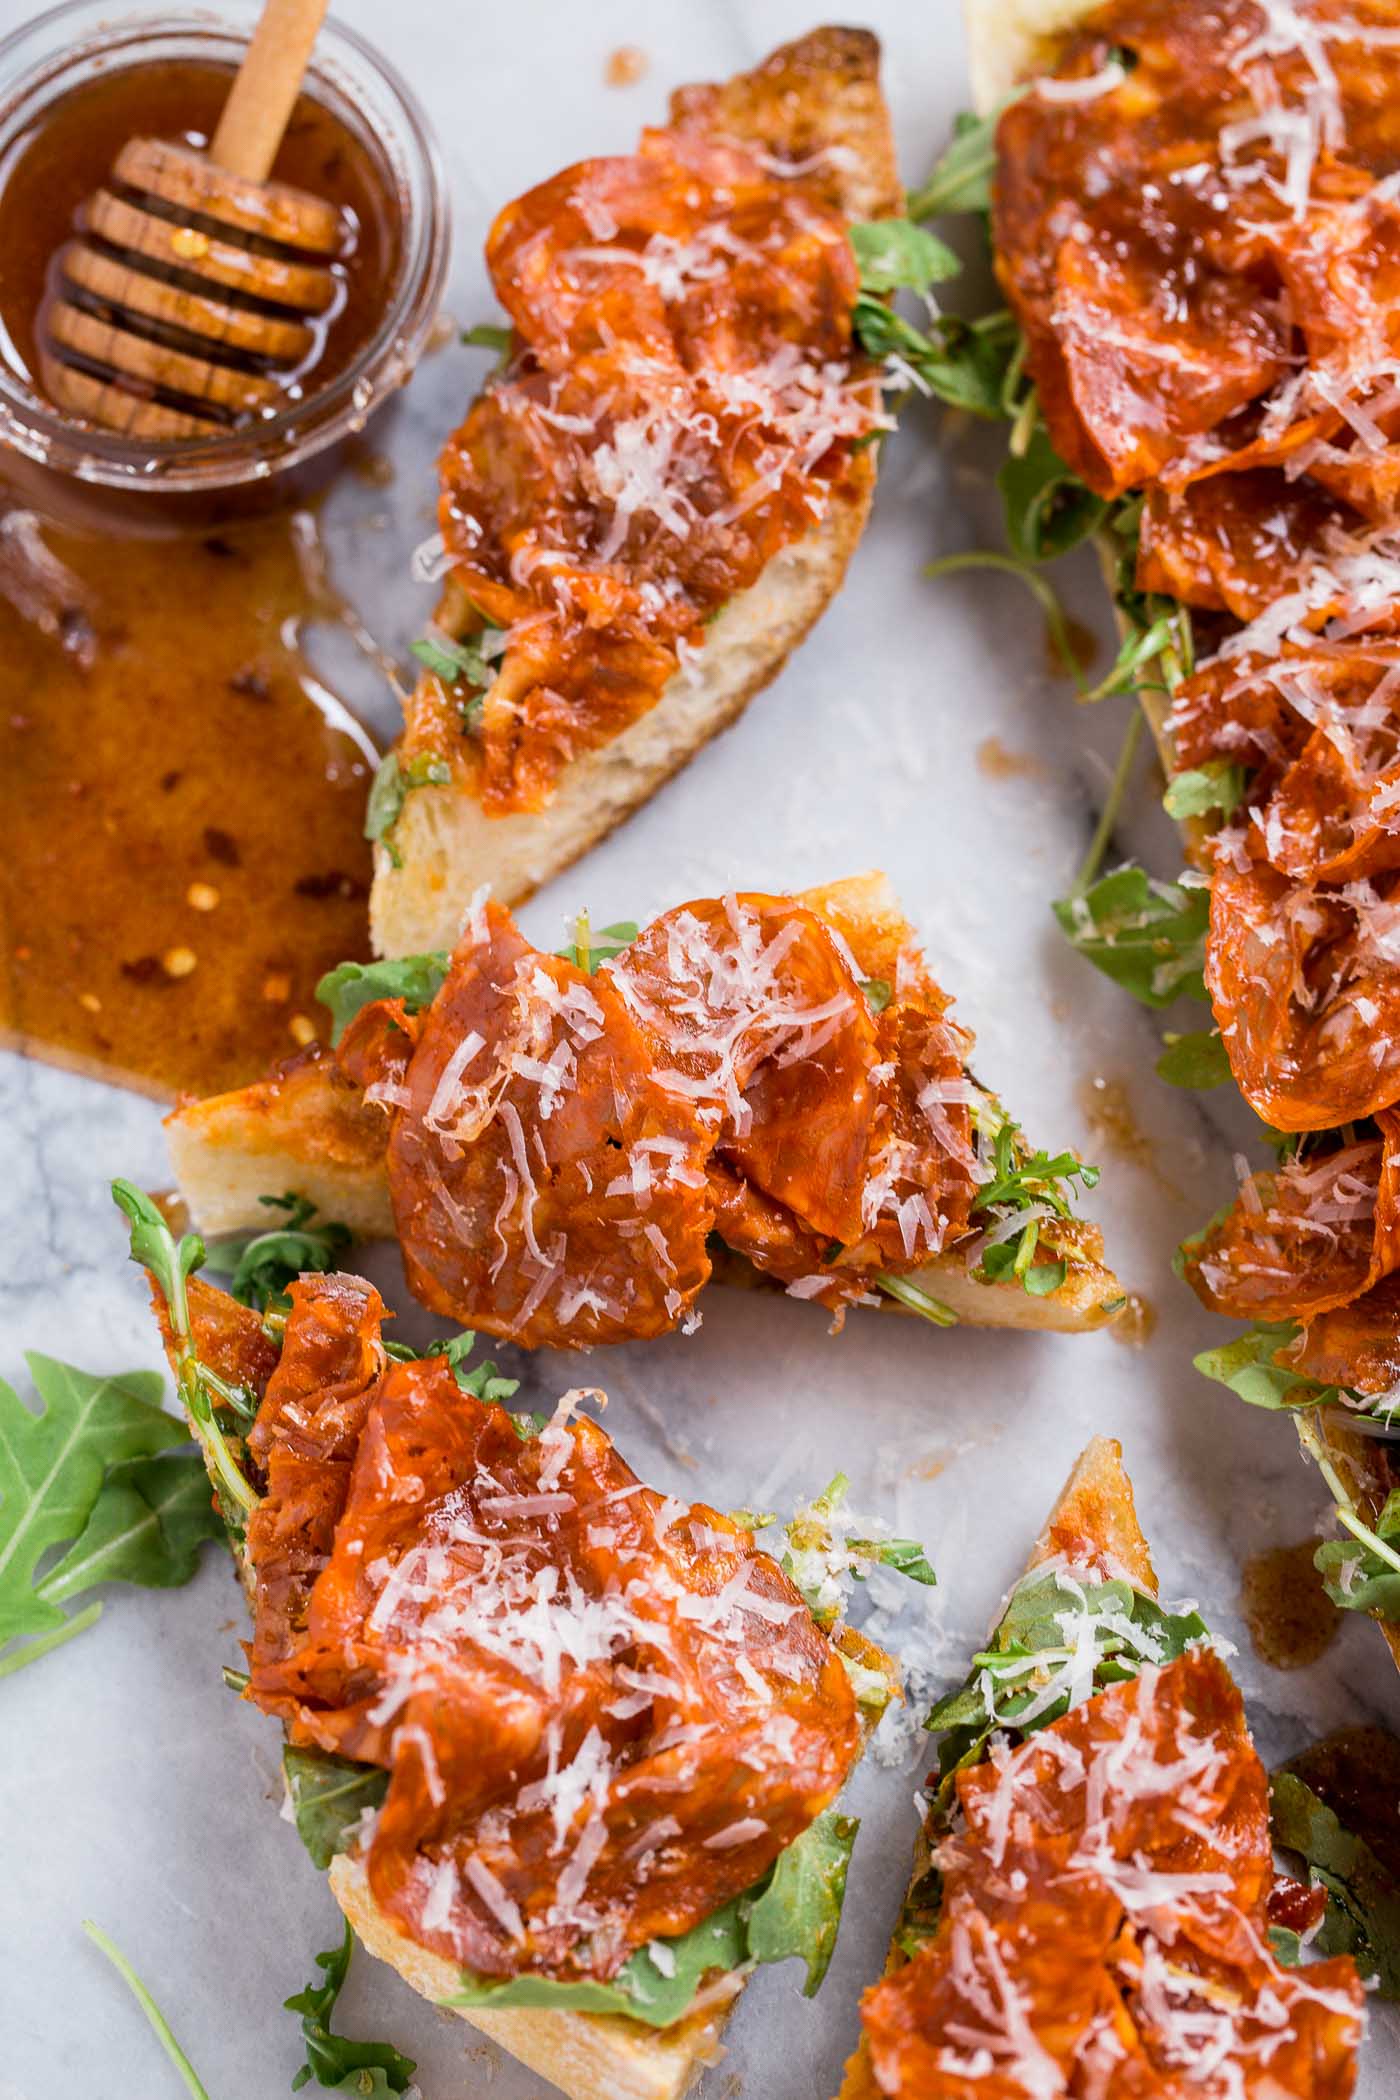 easy chorizo french breads with manchego, fig spread, & harissa, & covered in big fat drizzles of homemade spicy paprika honey. an easy & elegant appetizer! an easy & elegant appetizer or snack, perfect for holiday entertaining! #playswellwithbutter #chorizo #harissa #manchego #holidayparty #cocktailparty #appetizer